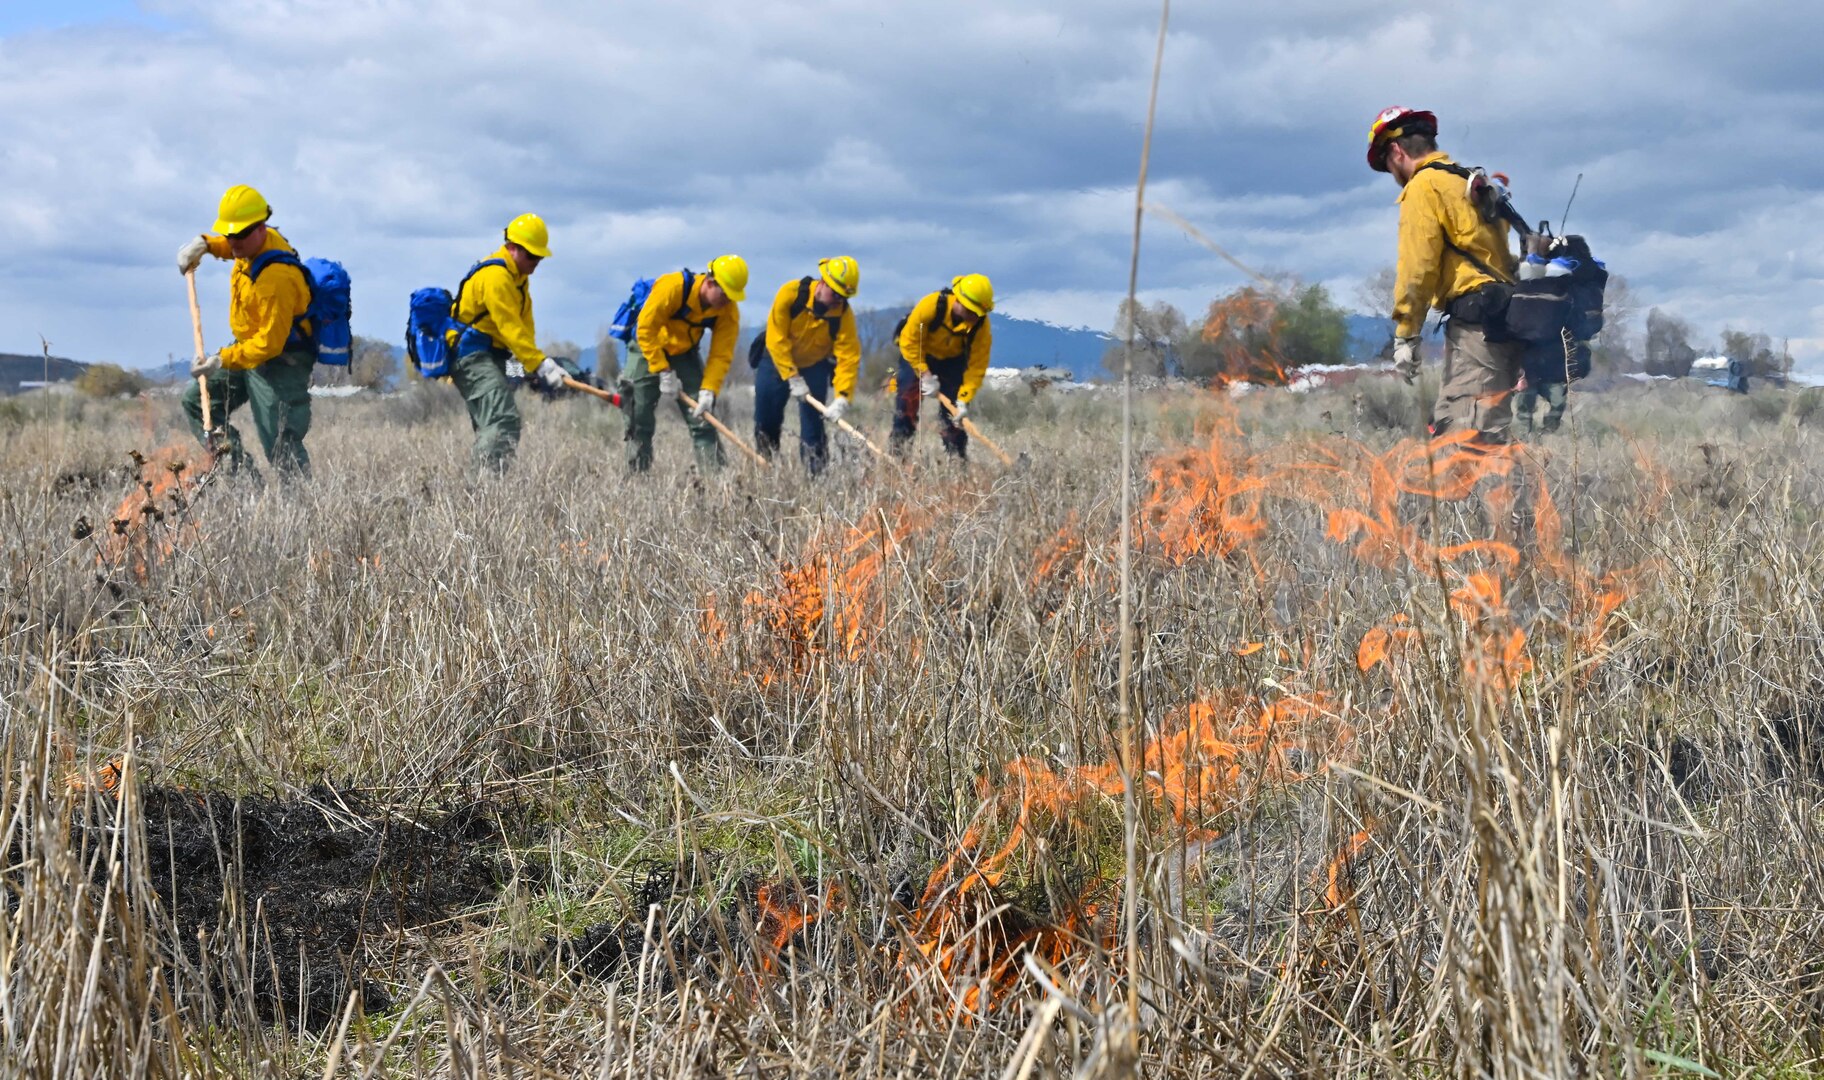 Airmen assigned to the 173rd Fighter Wing don Oregon Department of Forestry uniforms and extinguish a grass fire during wildland firefighter training at Kingsley Field in Klamath Falls, Ore., May 7, 2023. The training prepared Oregon Air Guardsmen to aid the state when wildland fires outpace state resources during hot summer months.